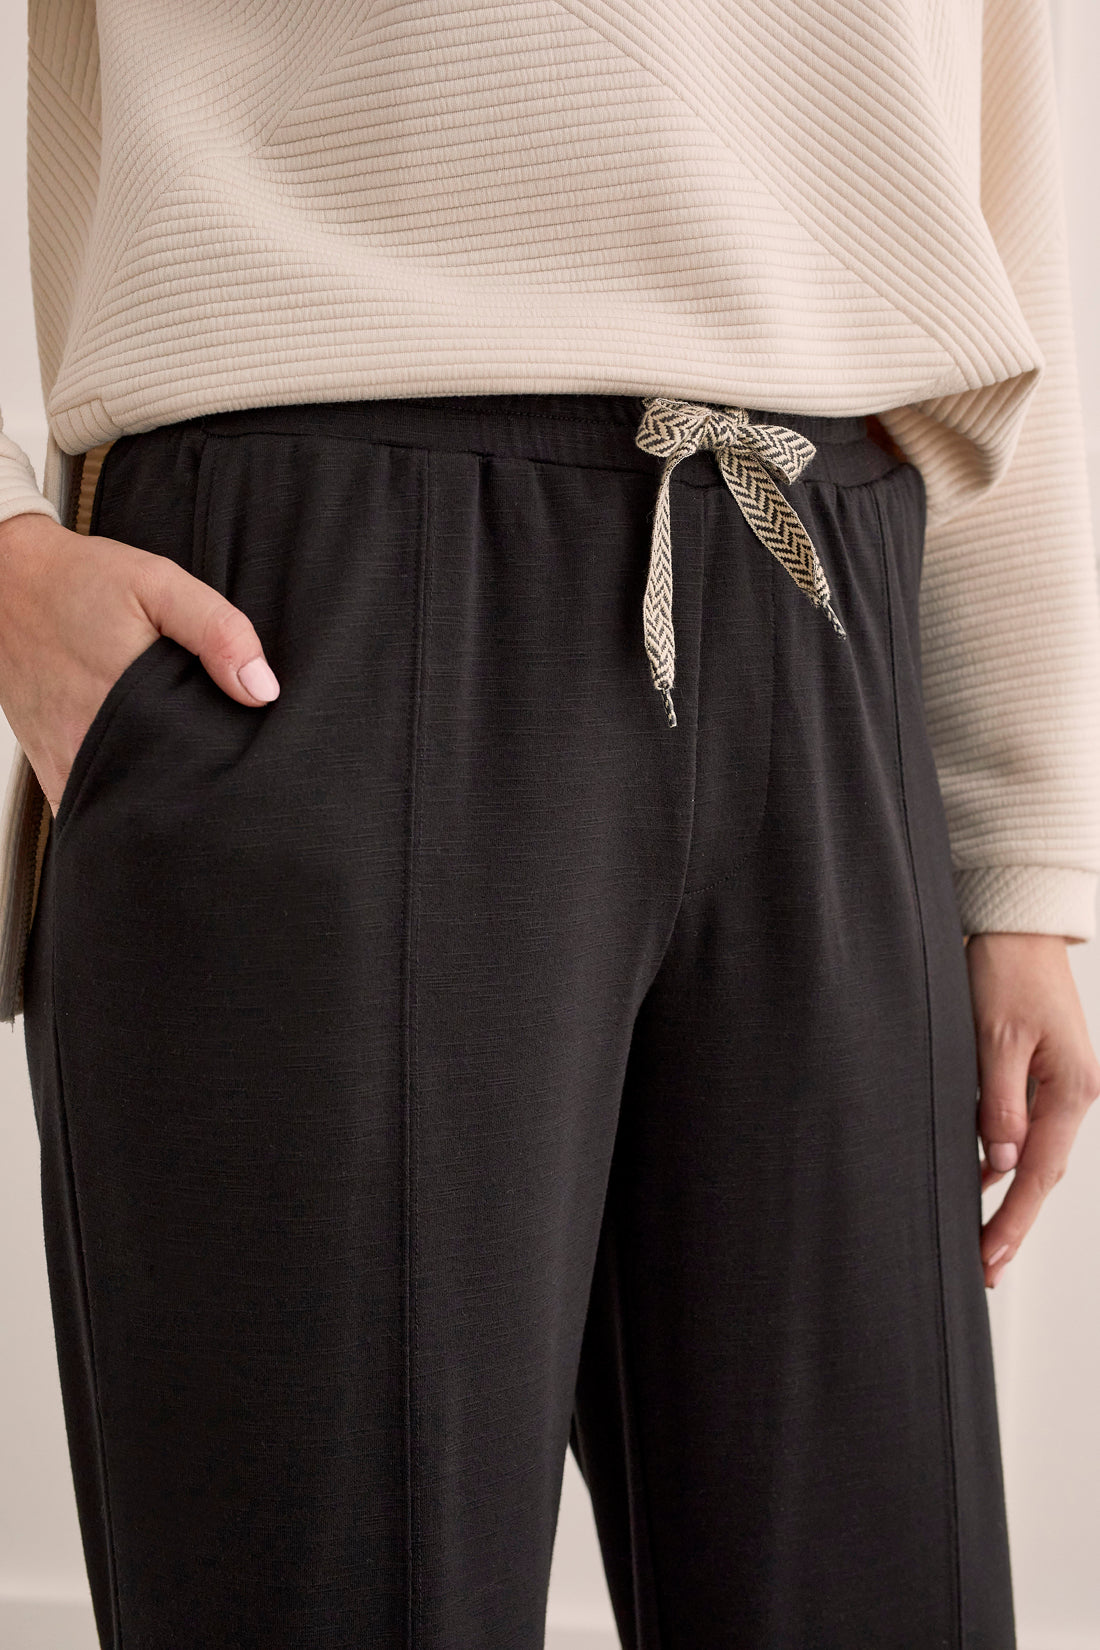 Pull On Knit Pant by Tribal